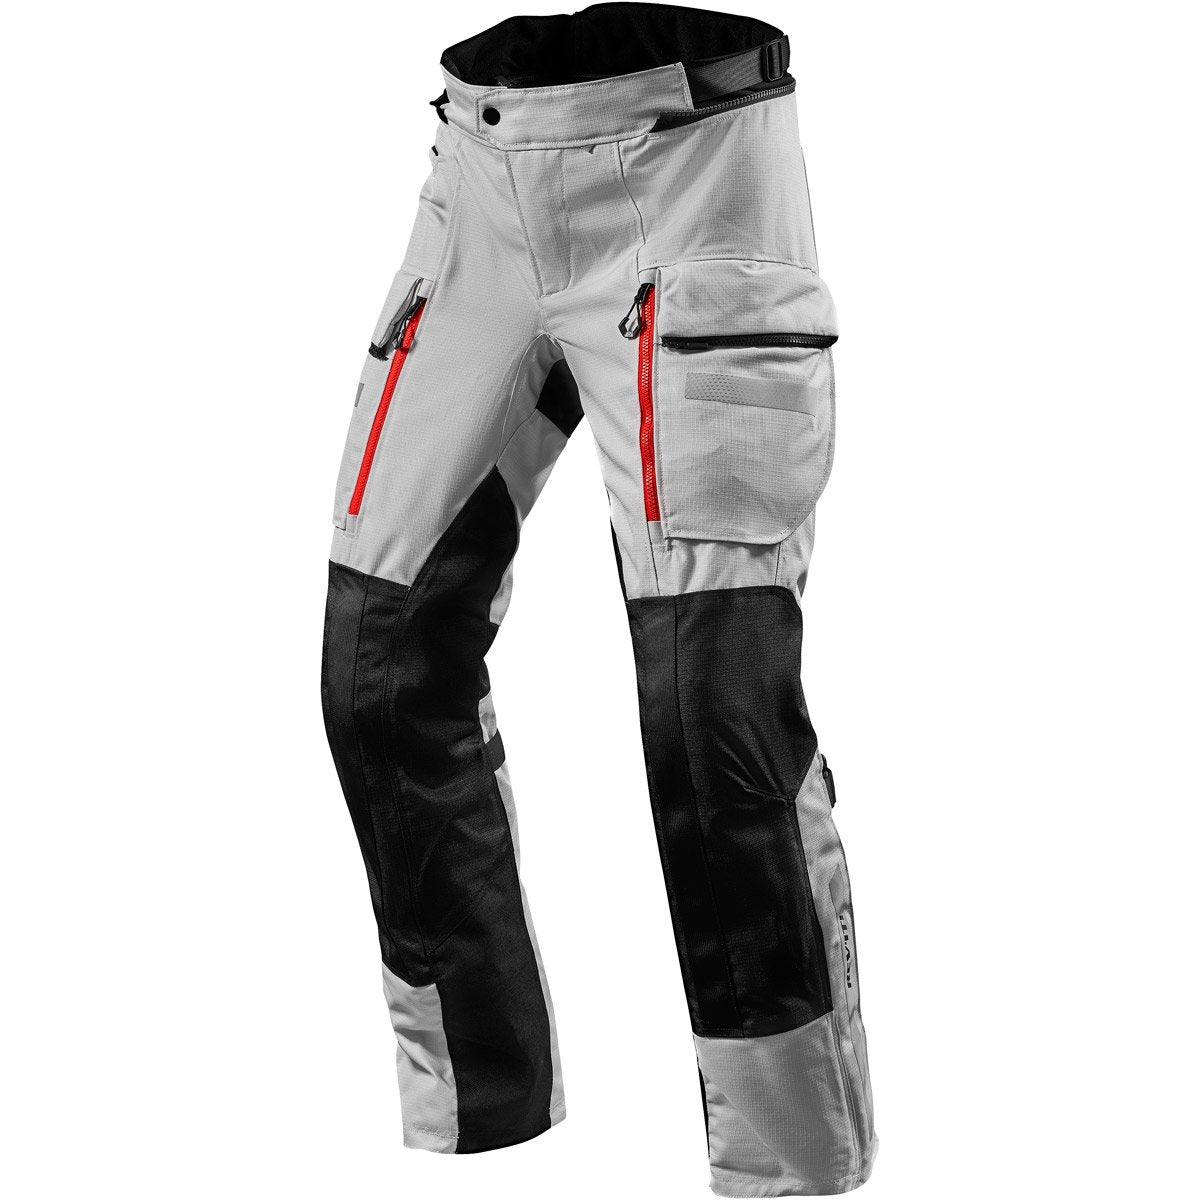 Rev It Sand 4 Trousers H2O 36in Leg WP Silver Black - Motorcycle Trousers